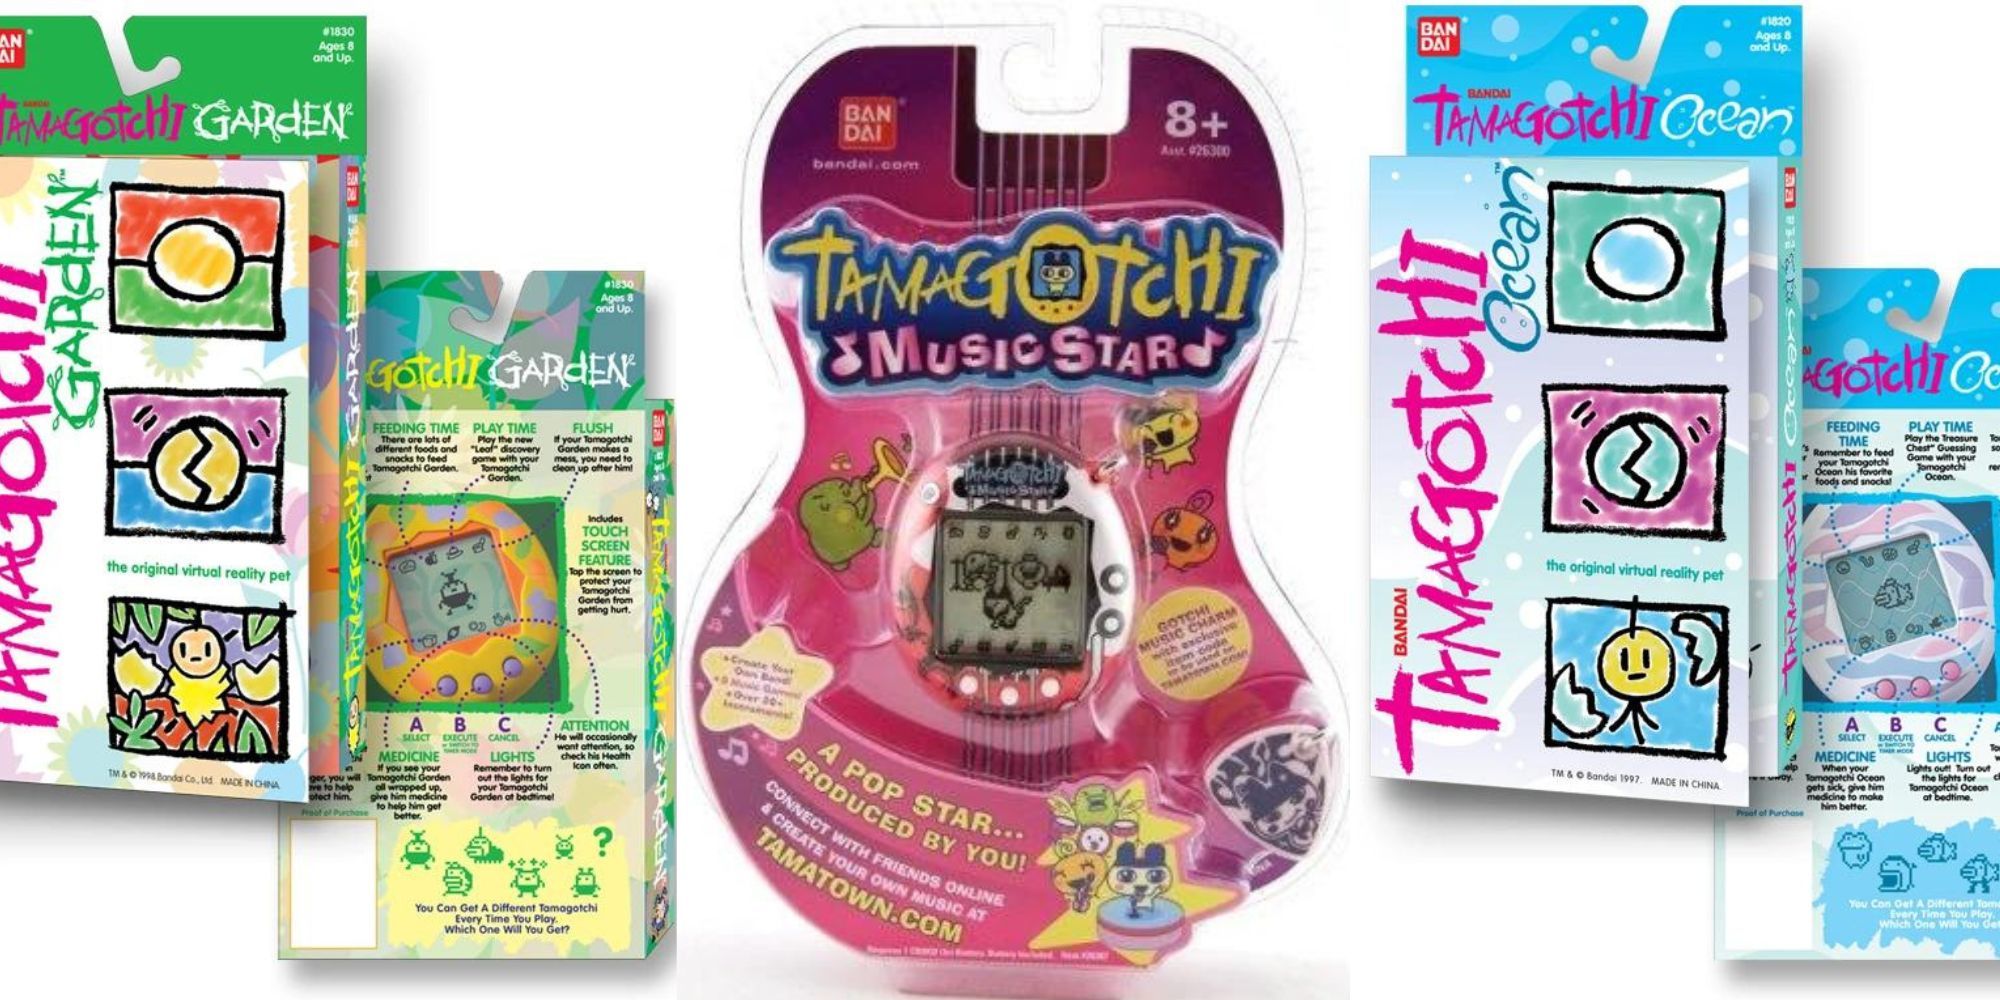 Hardest Tamagotchi to Care For featuring Tamagotchi Garden, Tamagotchi Music Stars, and Tamagotchi Ocean